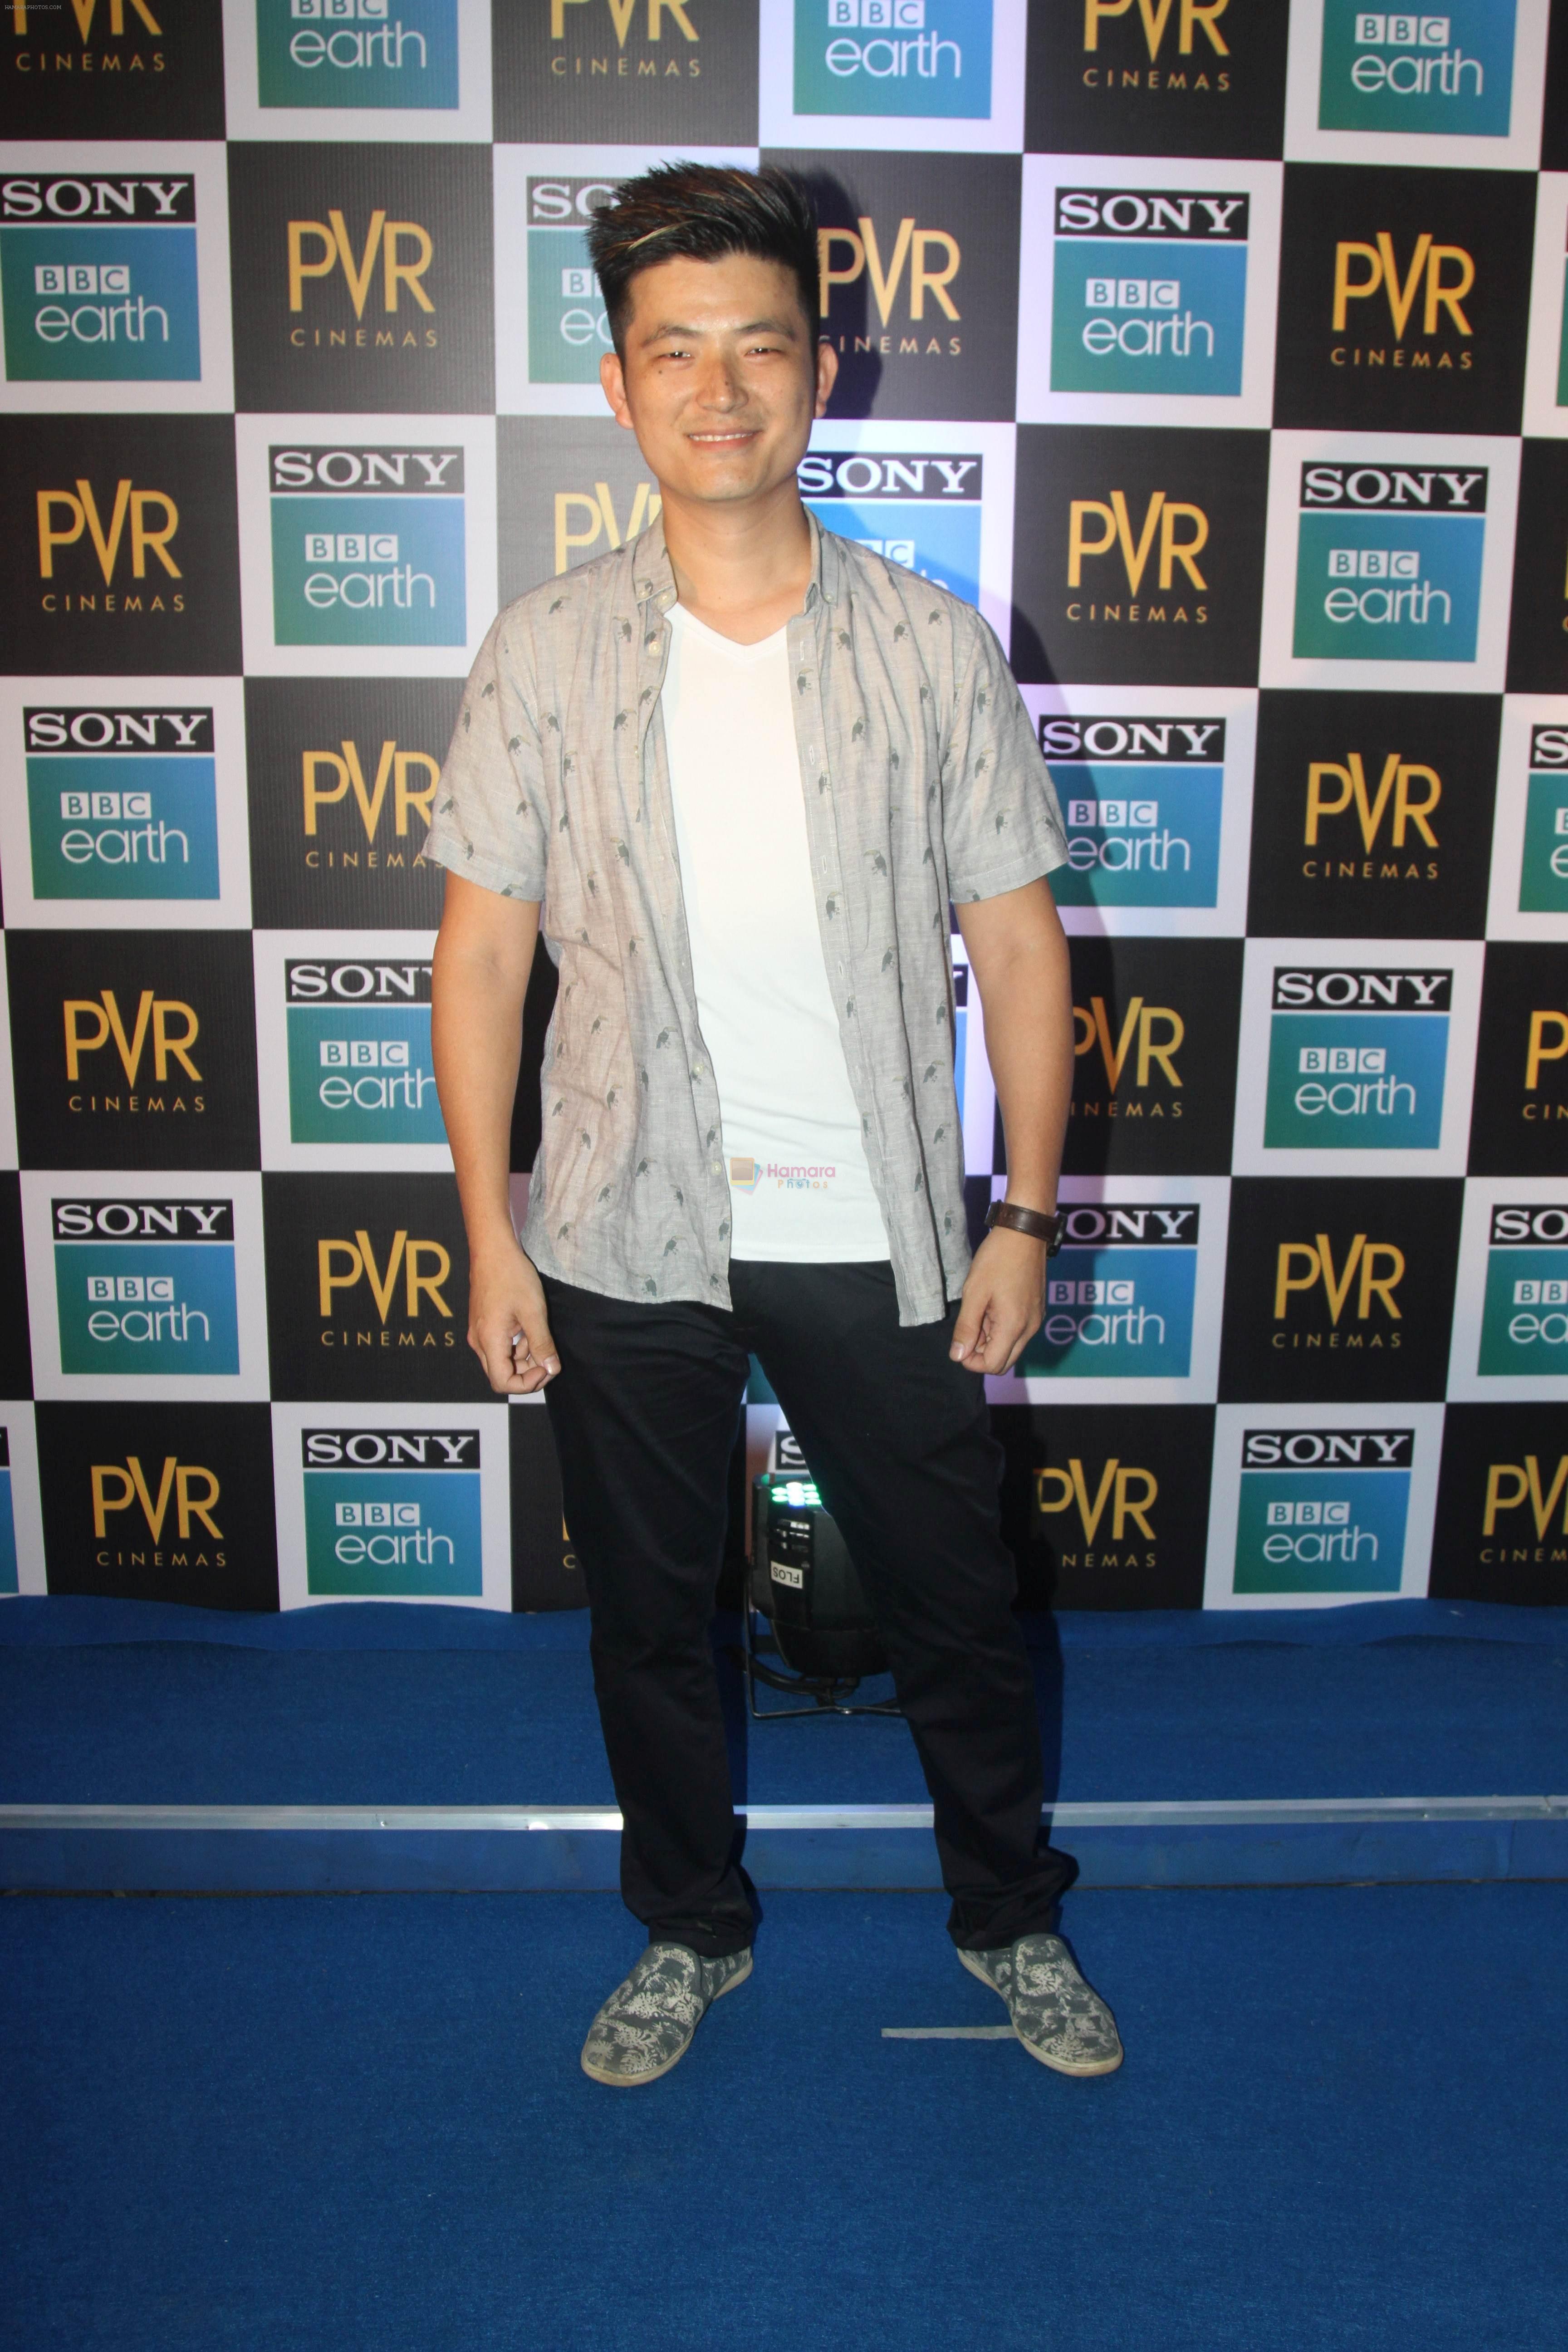 Meiyang Chang at the Screening of Sony BBC Earth's film Blue Planet 2 at pvr icon in andheri on 15th May 2018